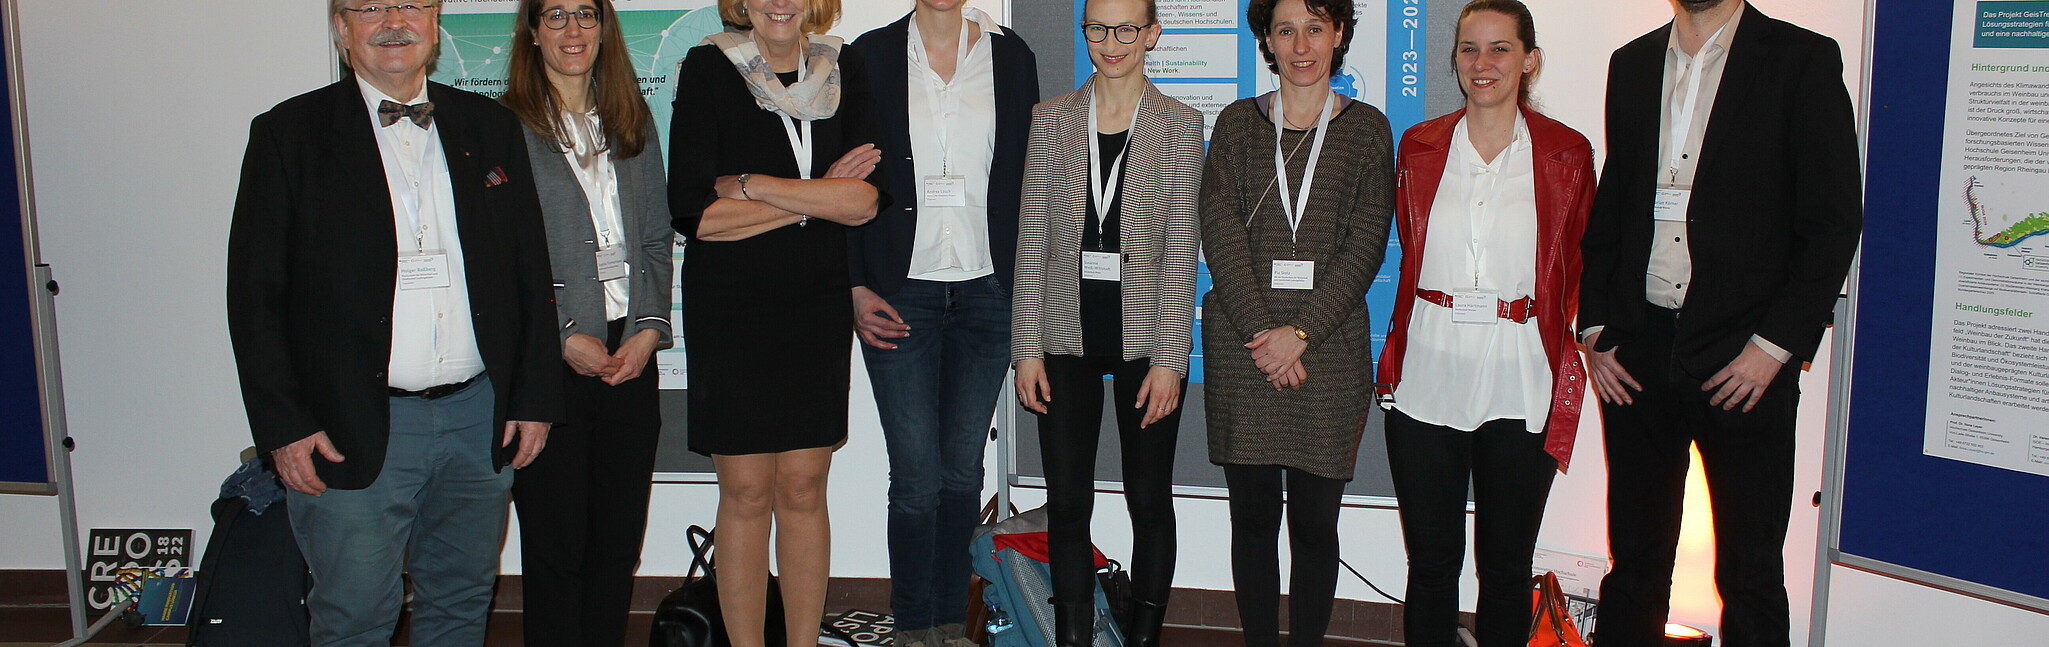 Members of the EMPOWER team at the kick-off event for the second funding round of the federal-state initiative "Innovative Hochschule" in the Mannheim Baroque Palace on March 21 - including Prof. Dr. Anett Mehler-Bicher, applicant of the EMPOWER joint proposal (3rd from left) and Dr. Susanne Weiß-Wittstadt, project management and coordination EMPOWER (5th from left). (Photo: Holger Roßberg/HWG LU)